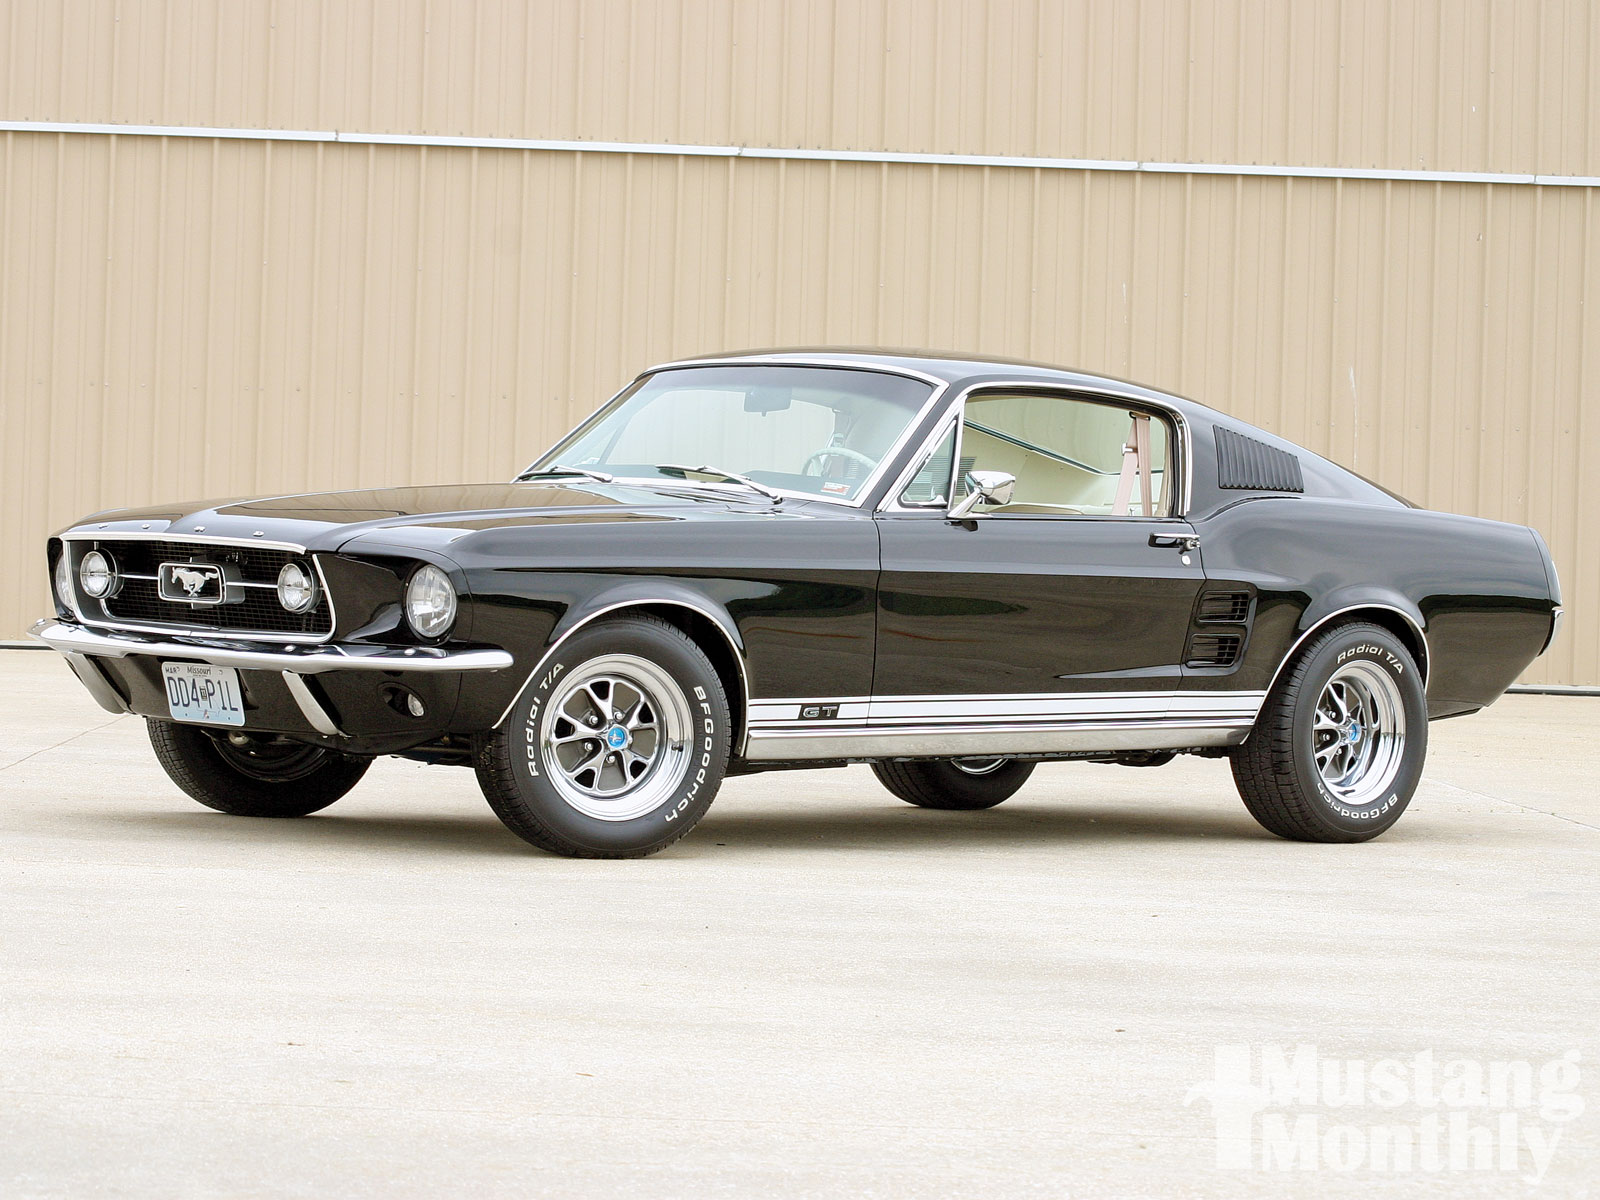 http://wallimgs.com/ford-mustang-1967.html